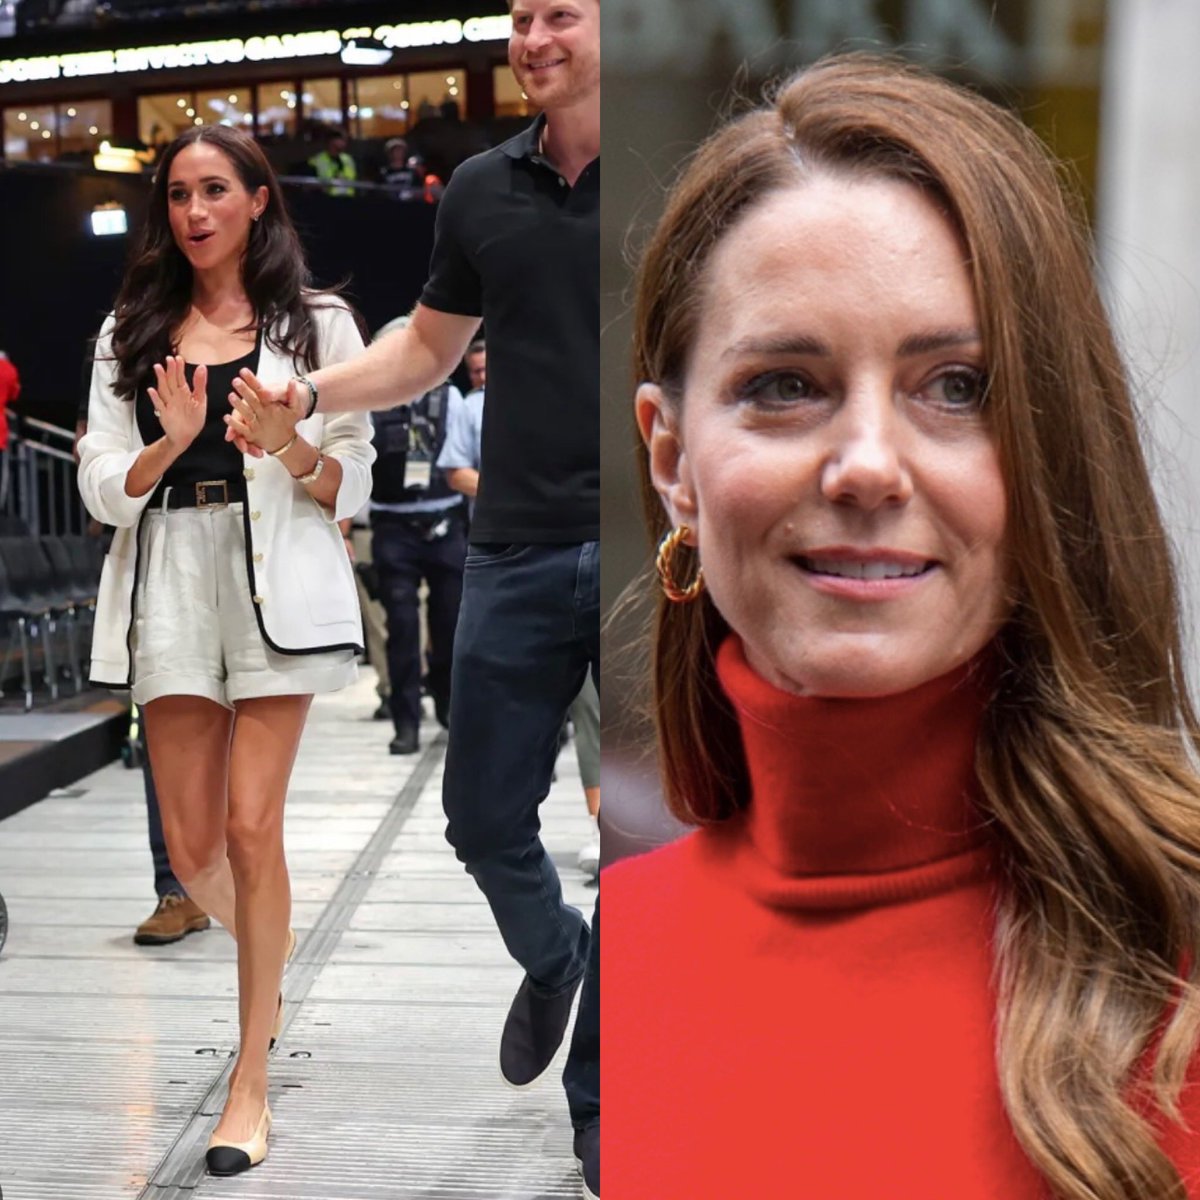 @JusticeR79177 @CrikCrak Who looks “older” than their age??
#MeghanMarkle or the #PrincessOfWhales